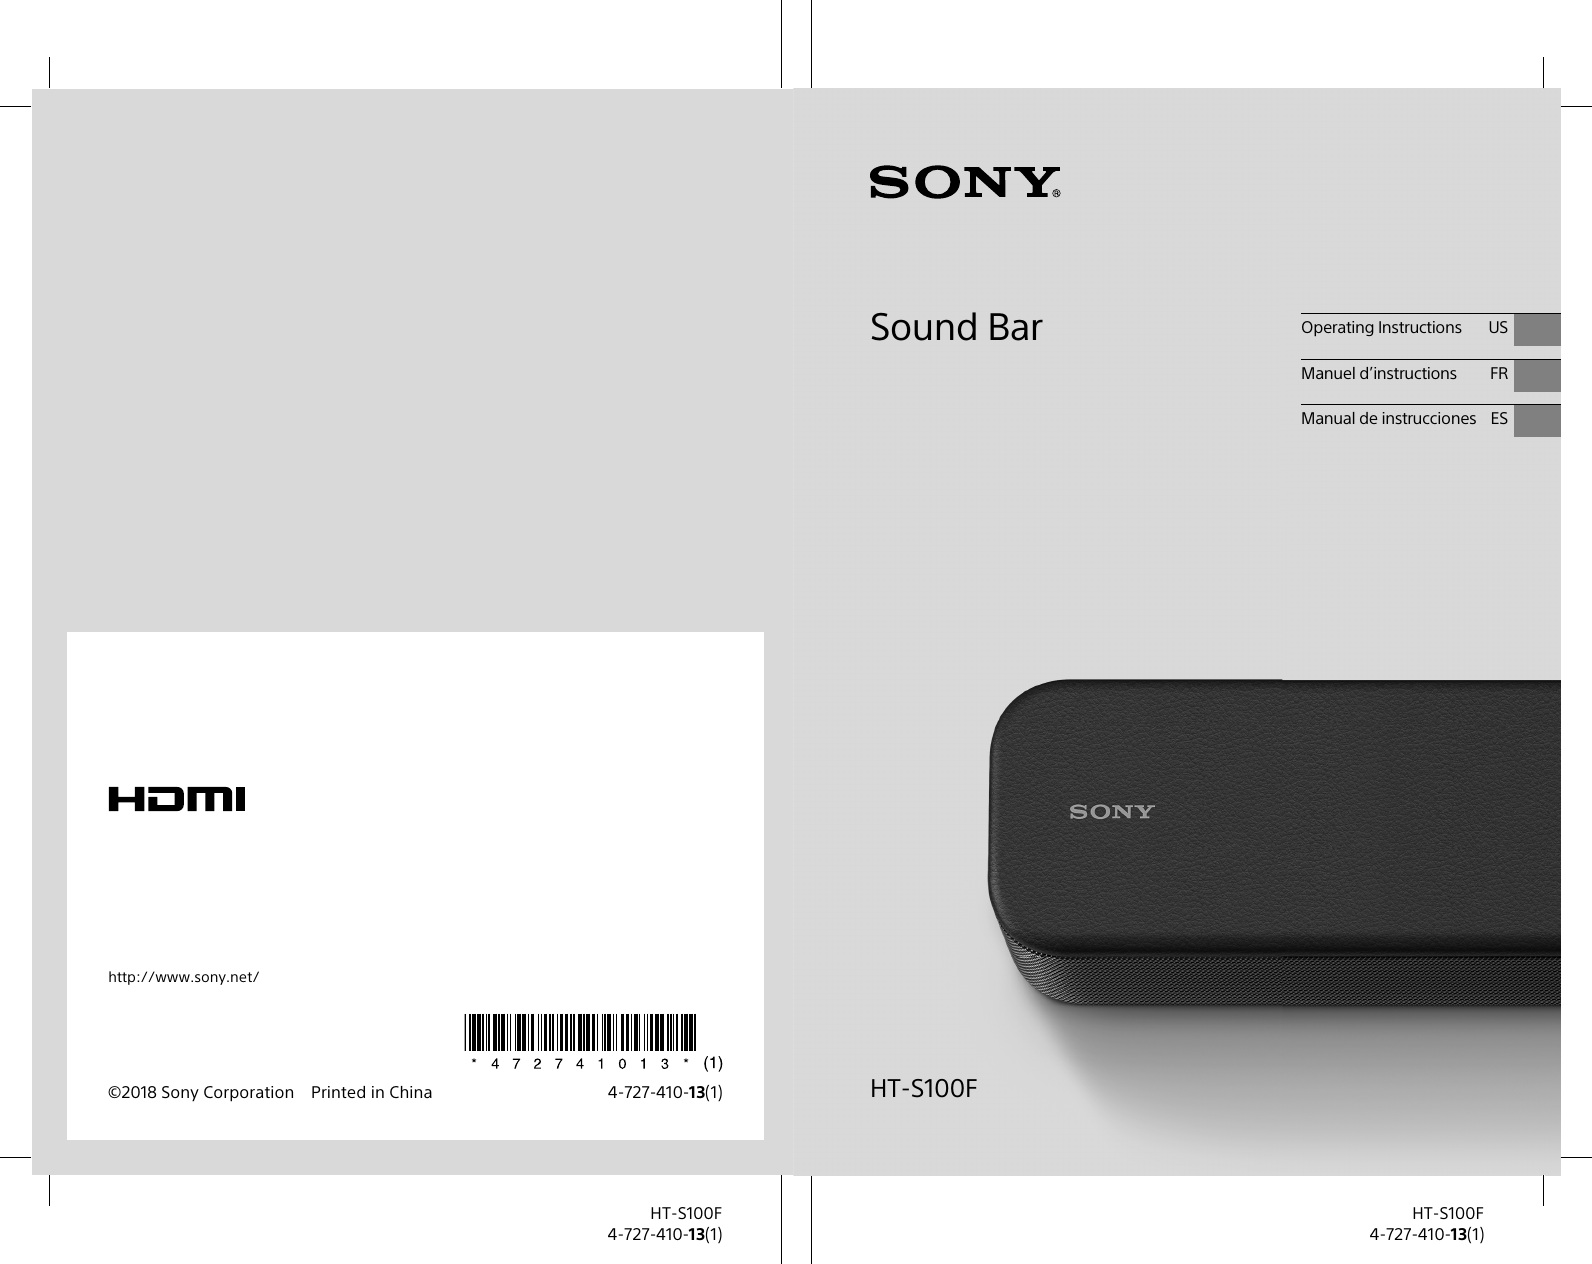 ©2018 Sony Corporation Printed in China 4-727-410-13(1)http://www.sony.net/HT-S100F4-727-410-13(1)HT-S100F4-727-410-13(1)Sound BarHT-S100FOperating Instructions USManuel d’instructions FRManual de instrucciones ES